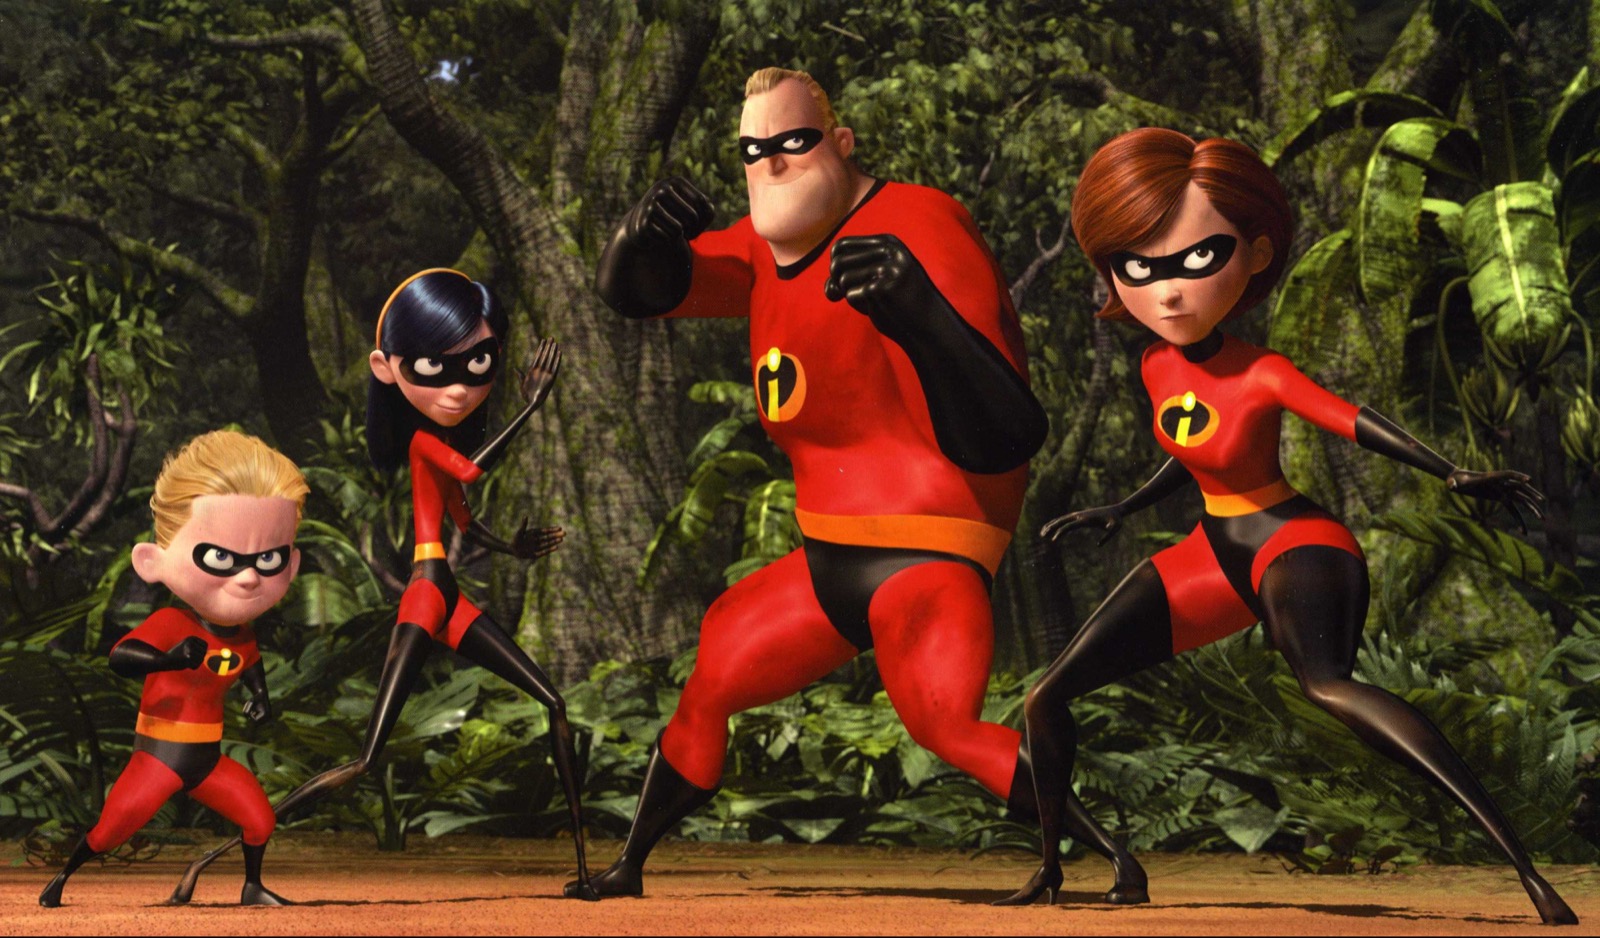 Only a True Pixar Fan Has Watched 18/21 of These Movies The Incredibles (2004)